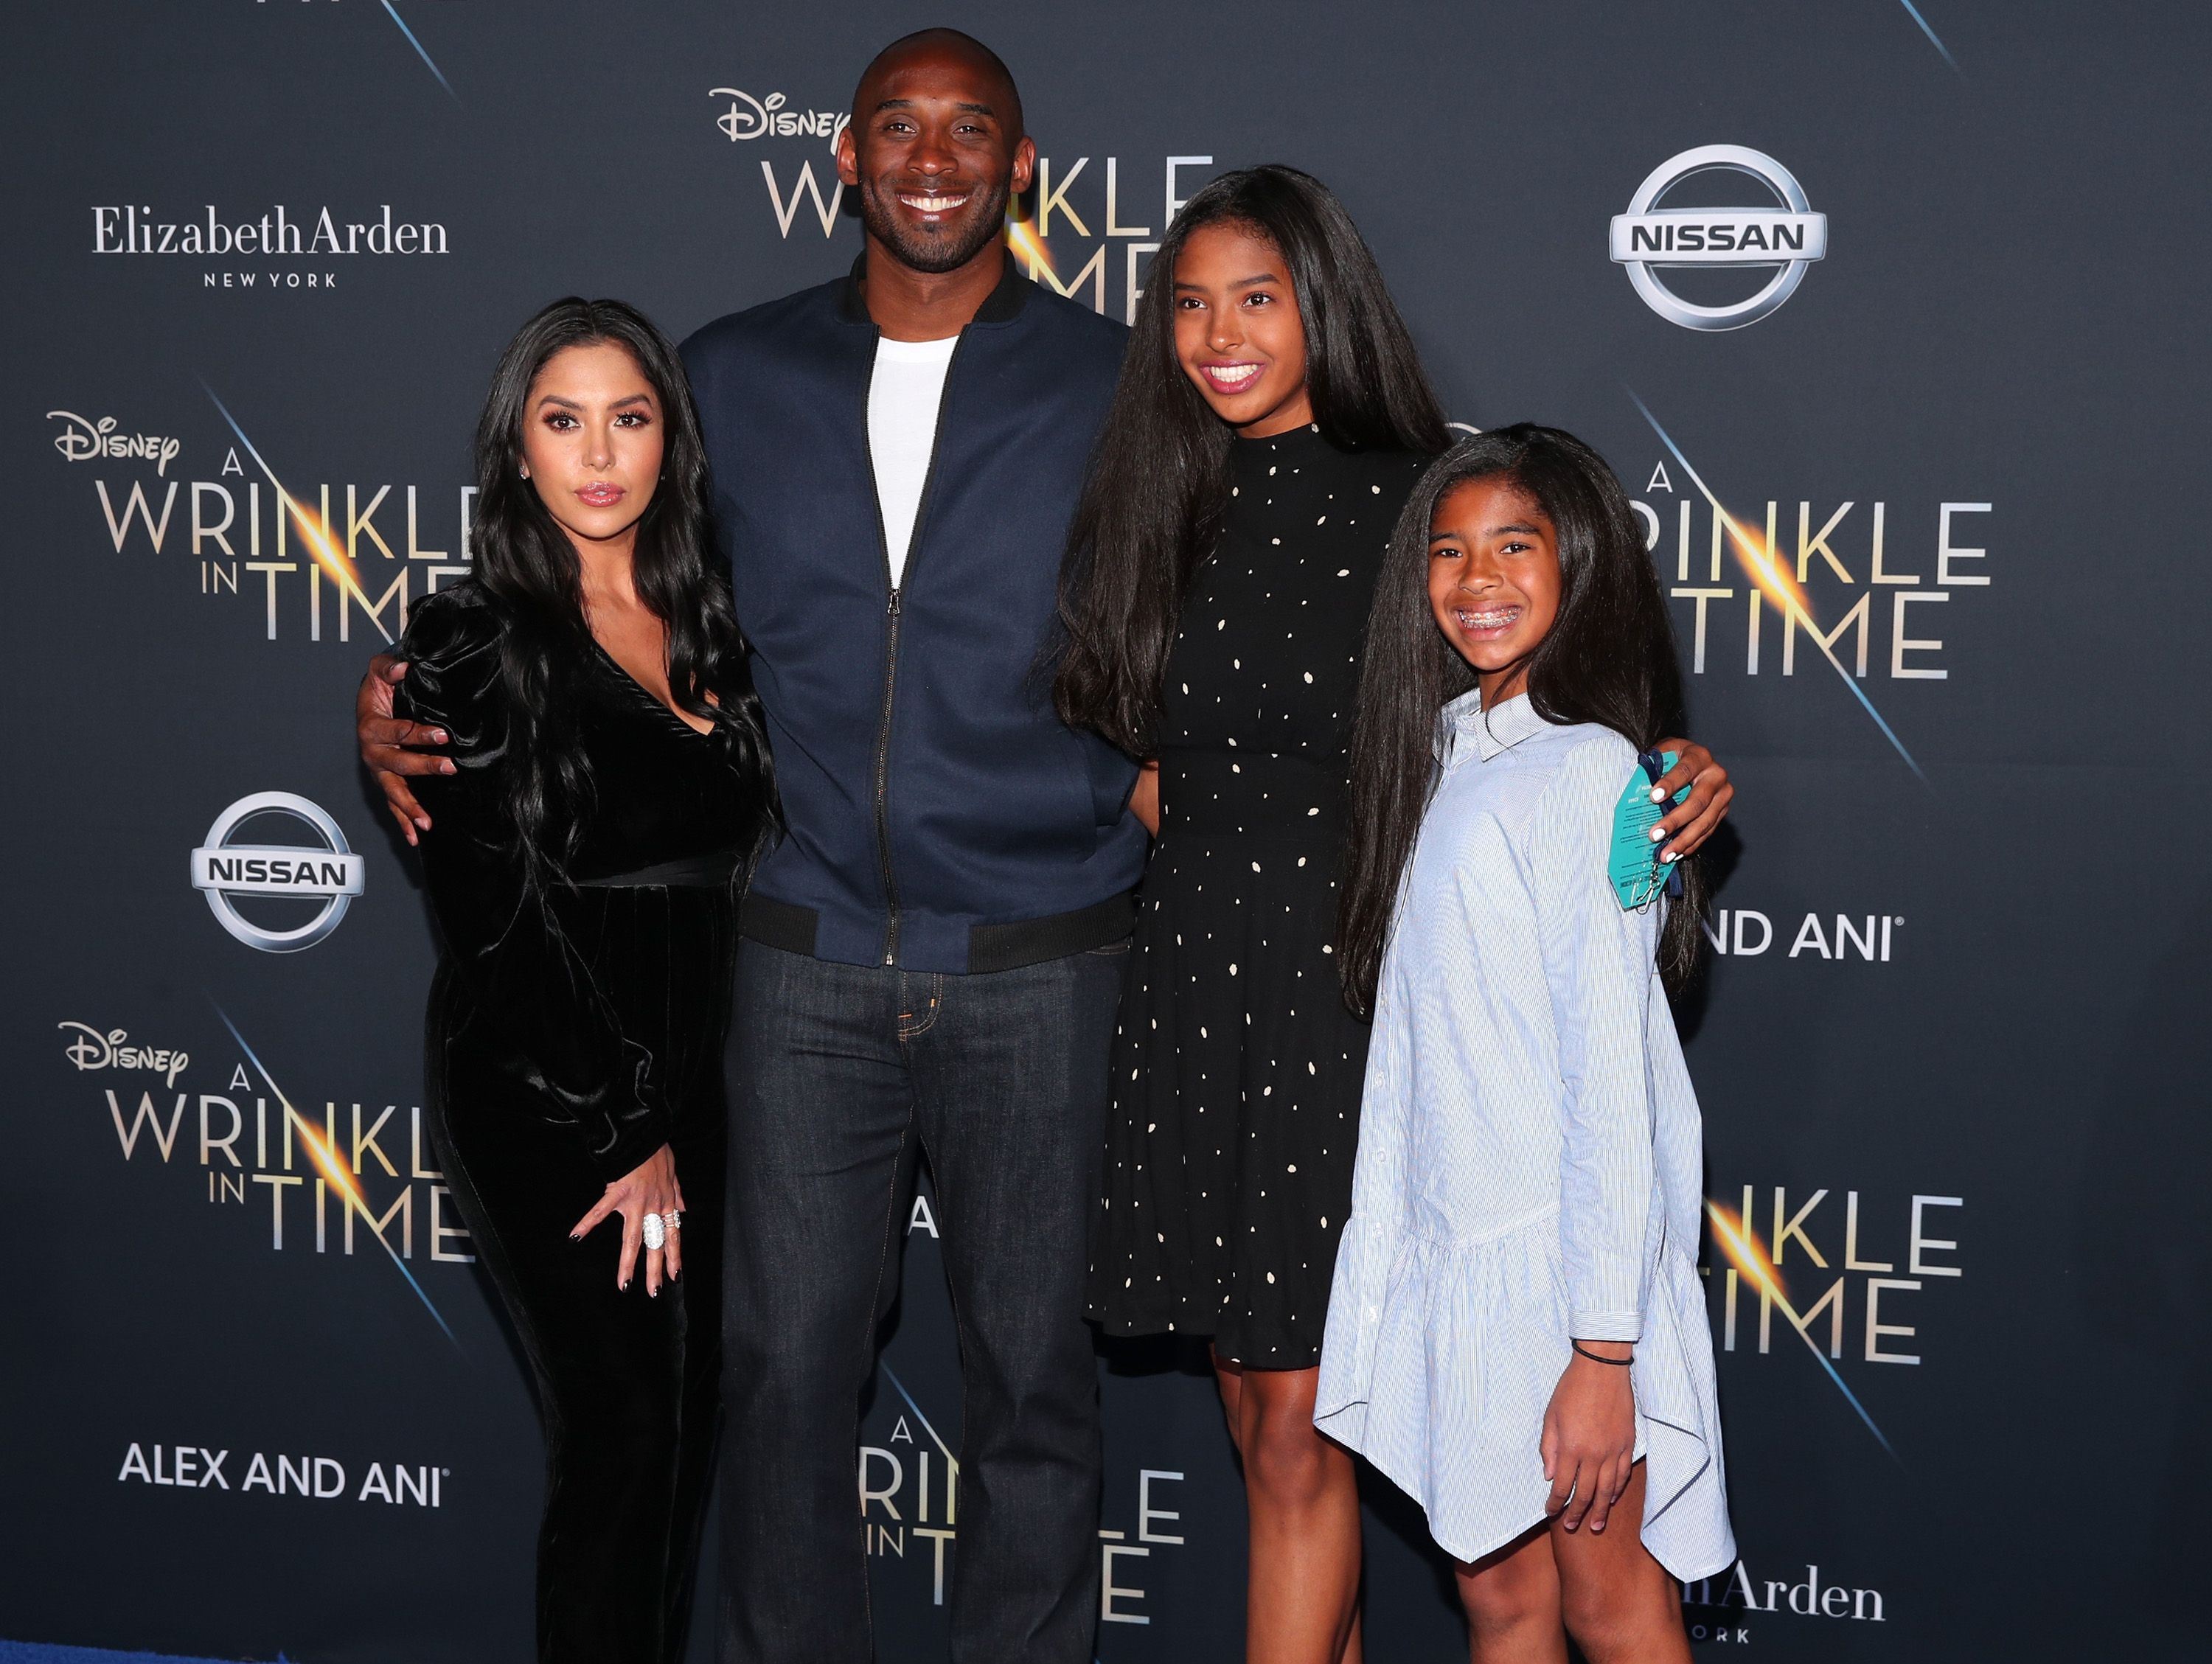 Vanessa and Kobe Bryant and their two oldest daughters, Natalia and Gianna at the premiere of "A Wrinkle in Time" in February 2018, in Los Angeles, California | Source: Getty Images